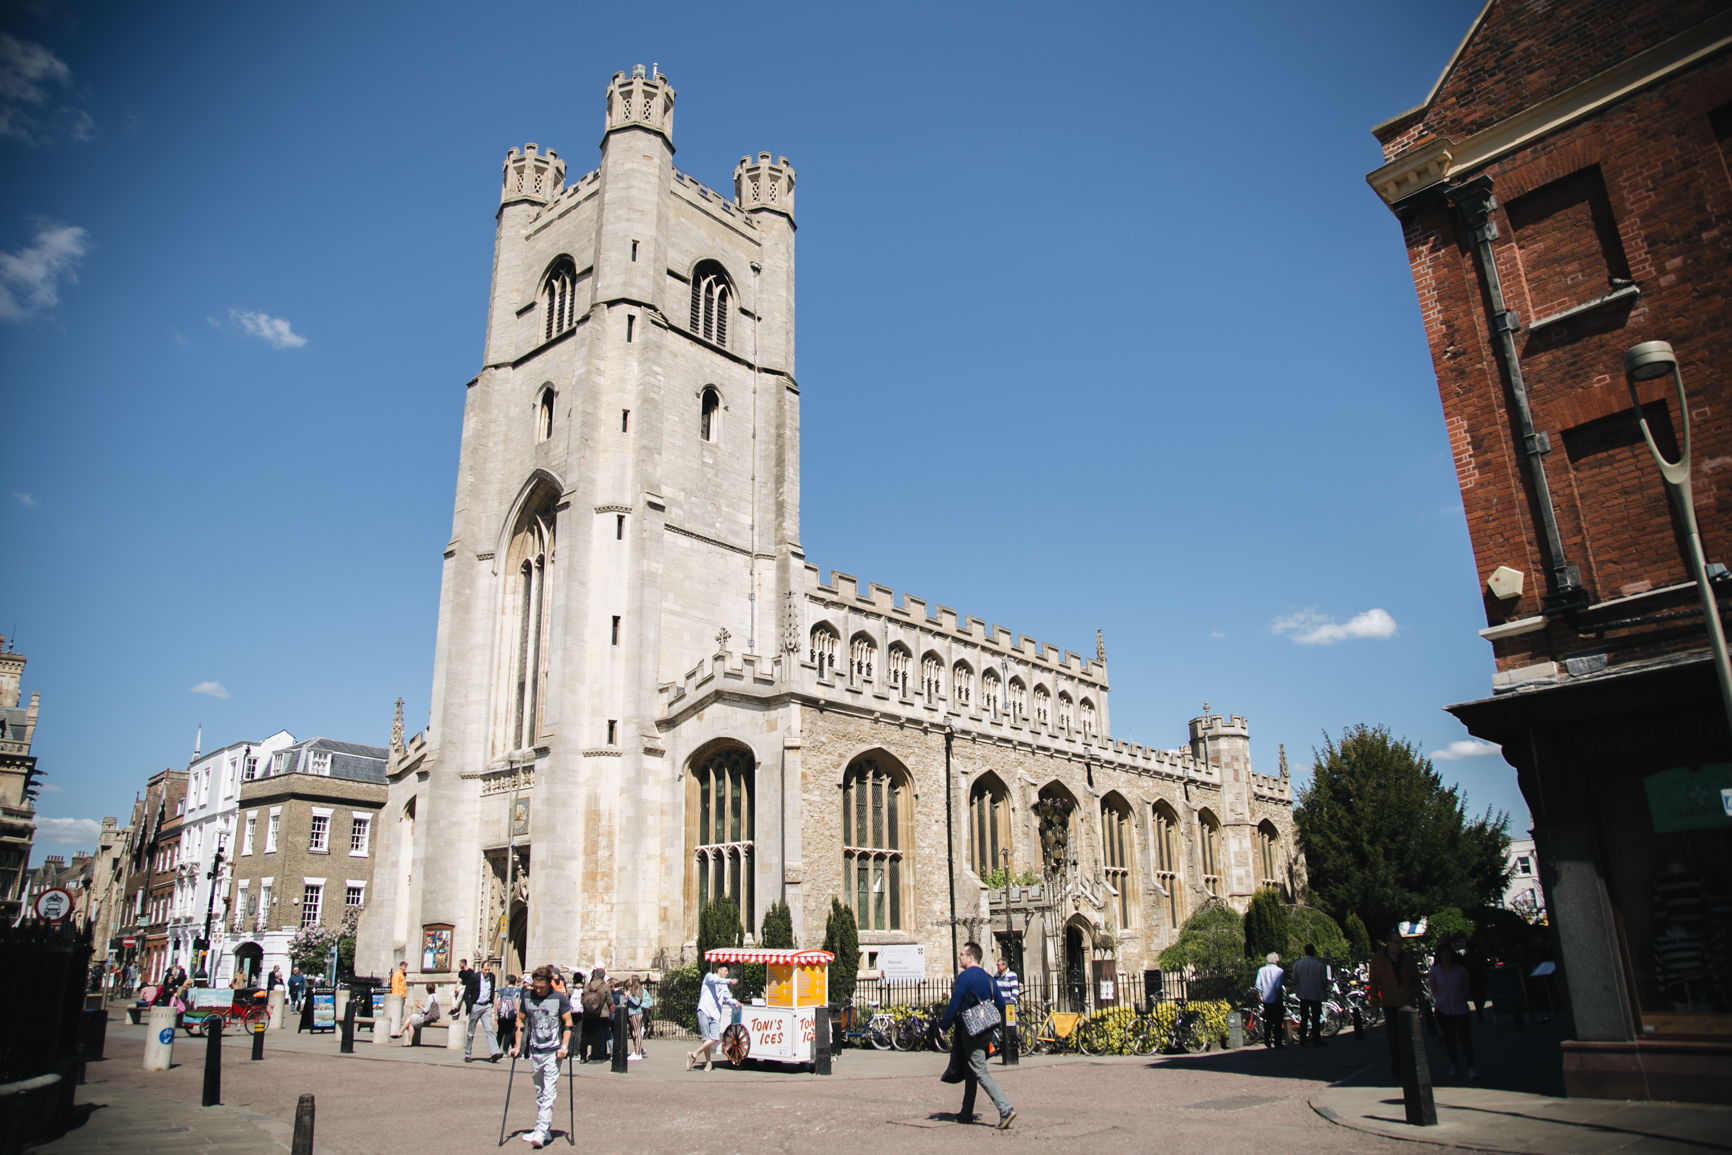 St-MARY-the-GREAT-cambridge-visit.jpg